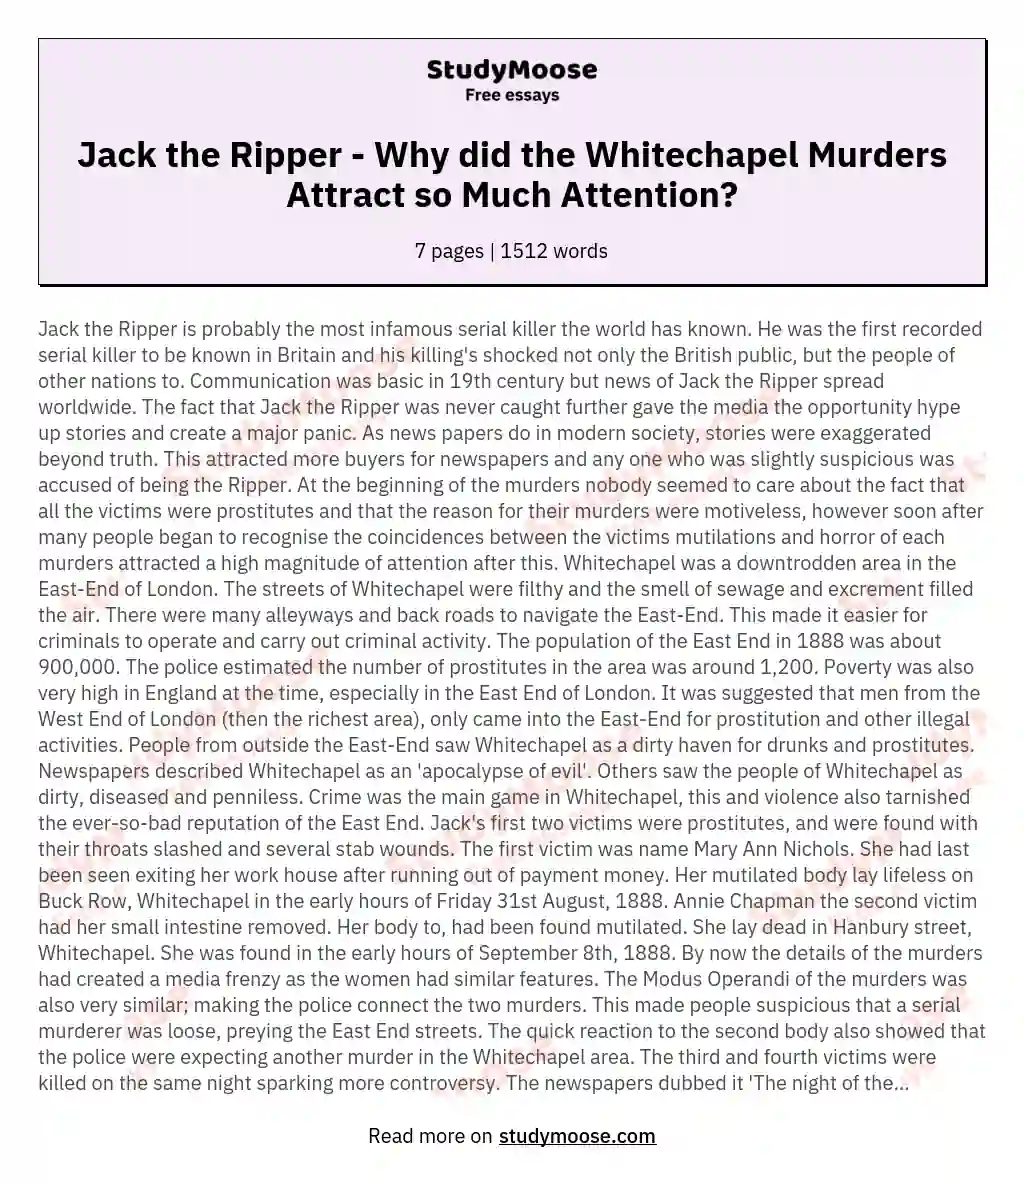 Jack the Ripper - Why did the Whitechapel Murders Attract so Much Attention?